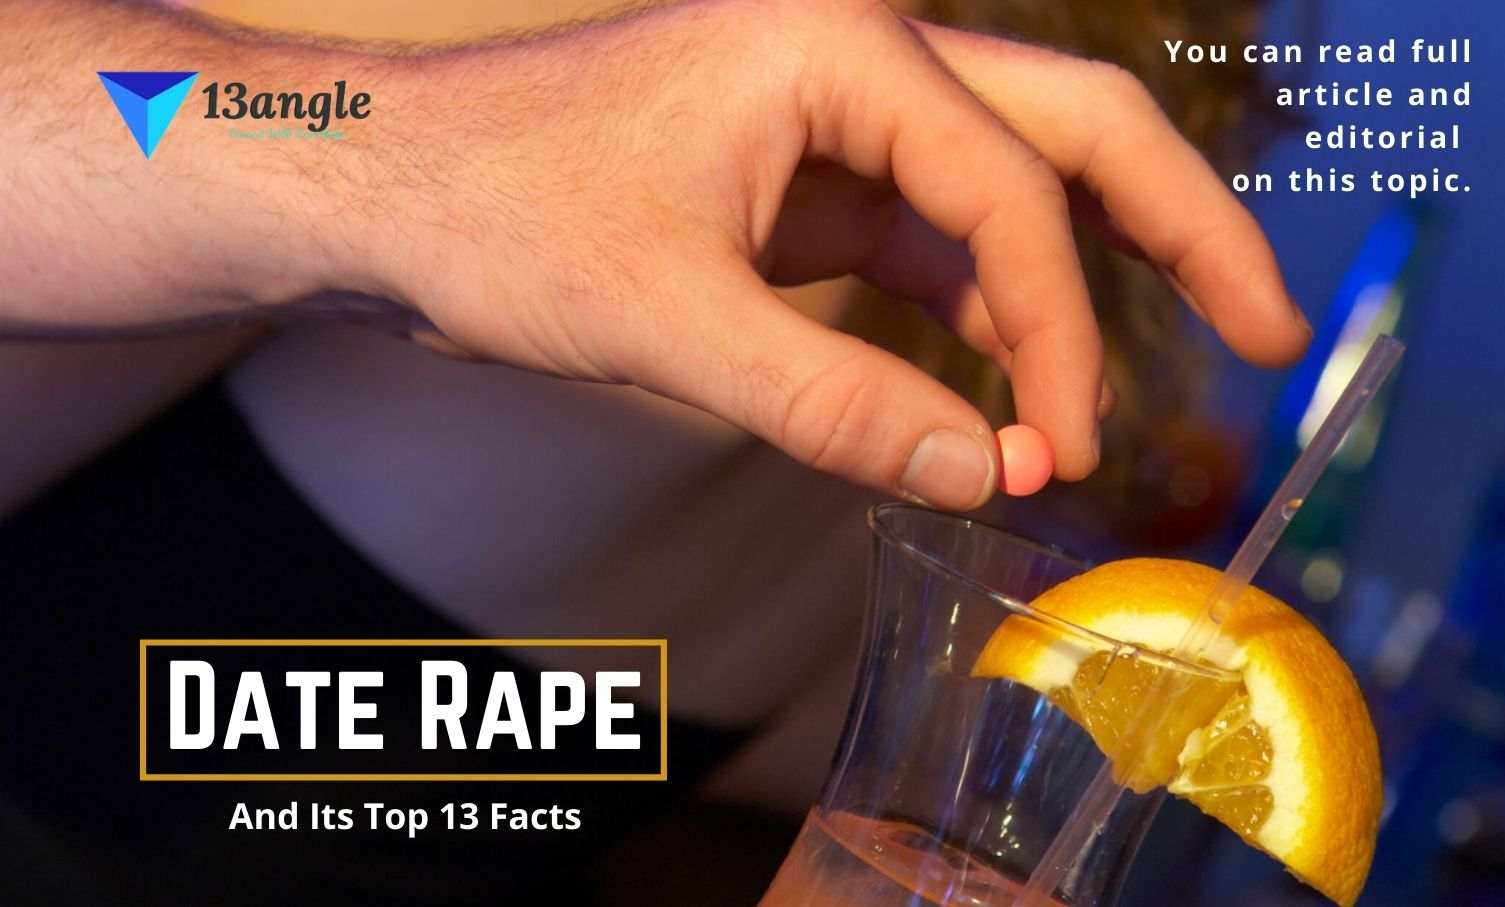 Date Rape And Its Top 13 Facts- 13angle.com